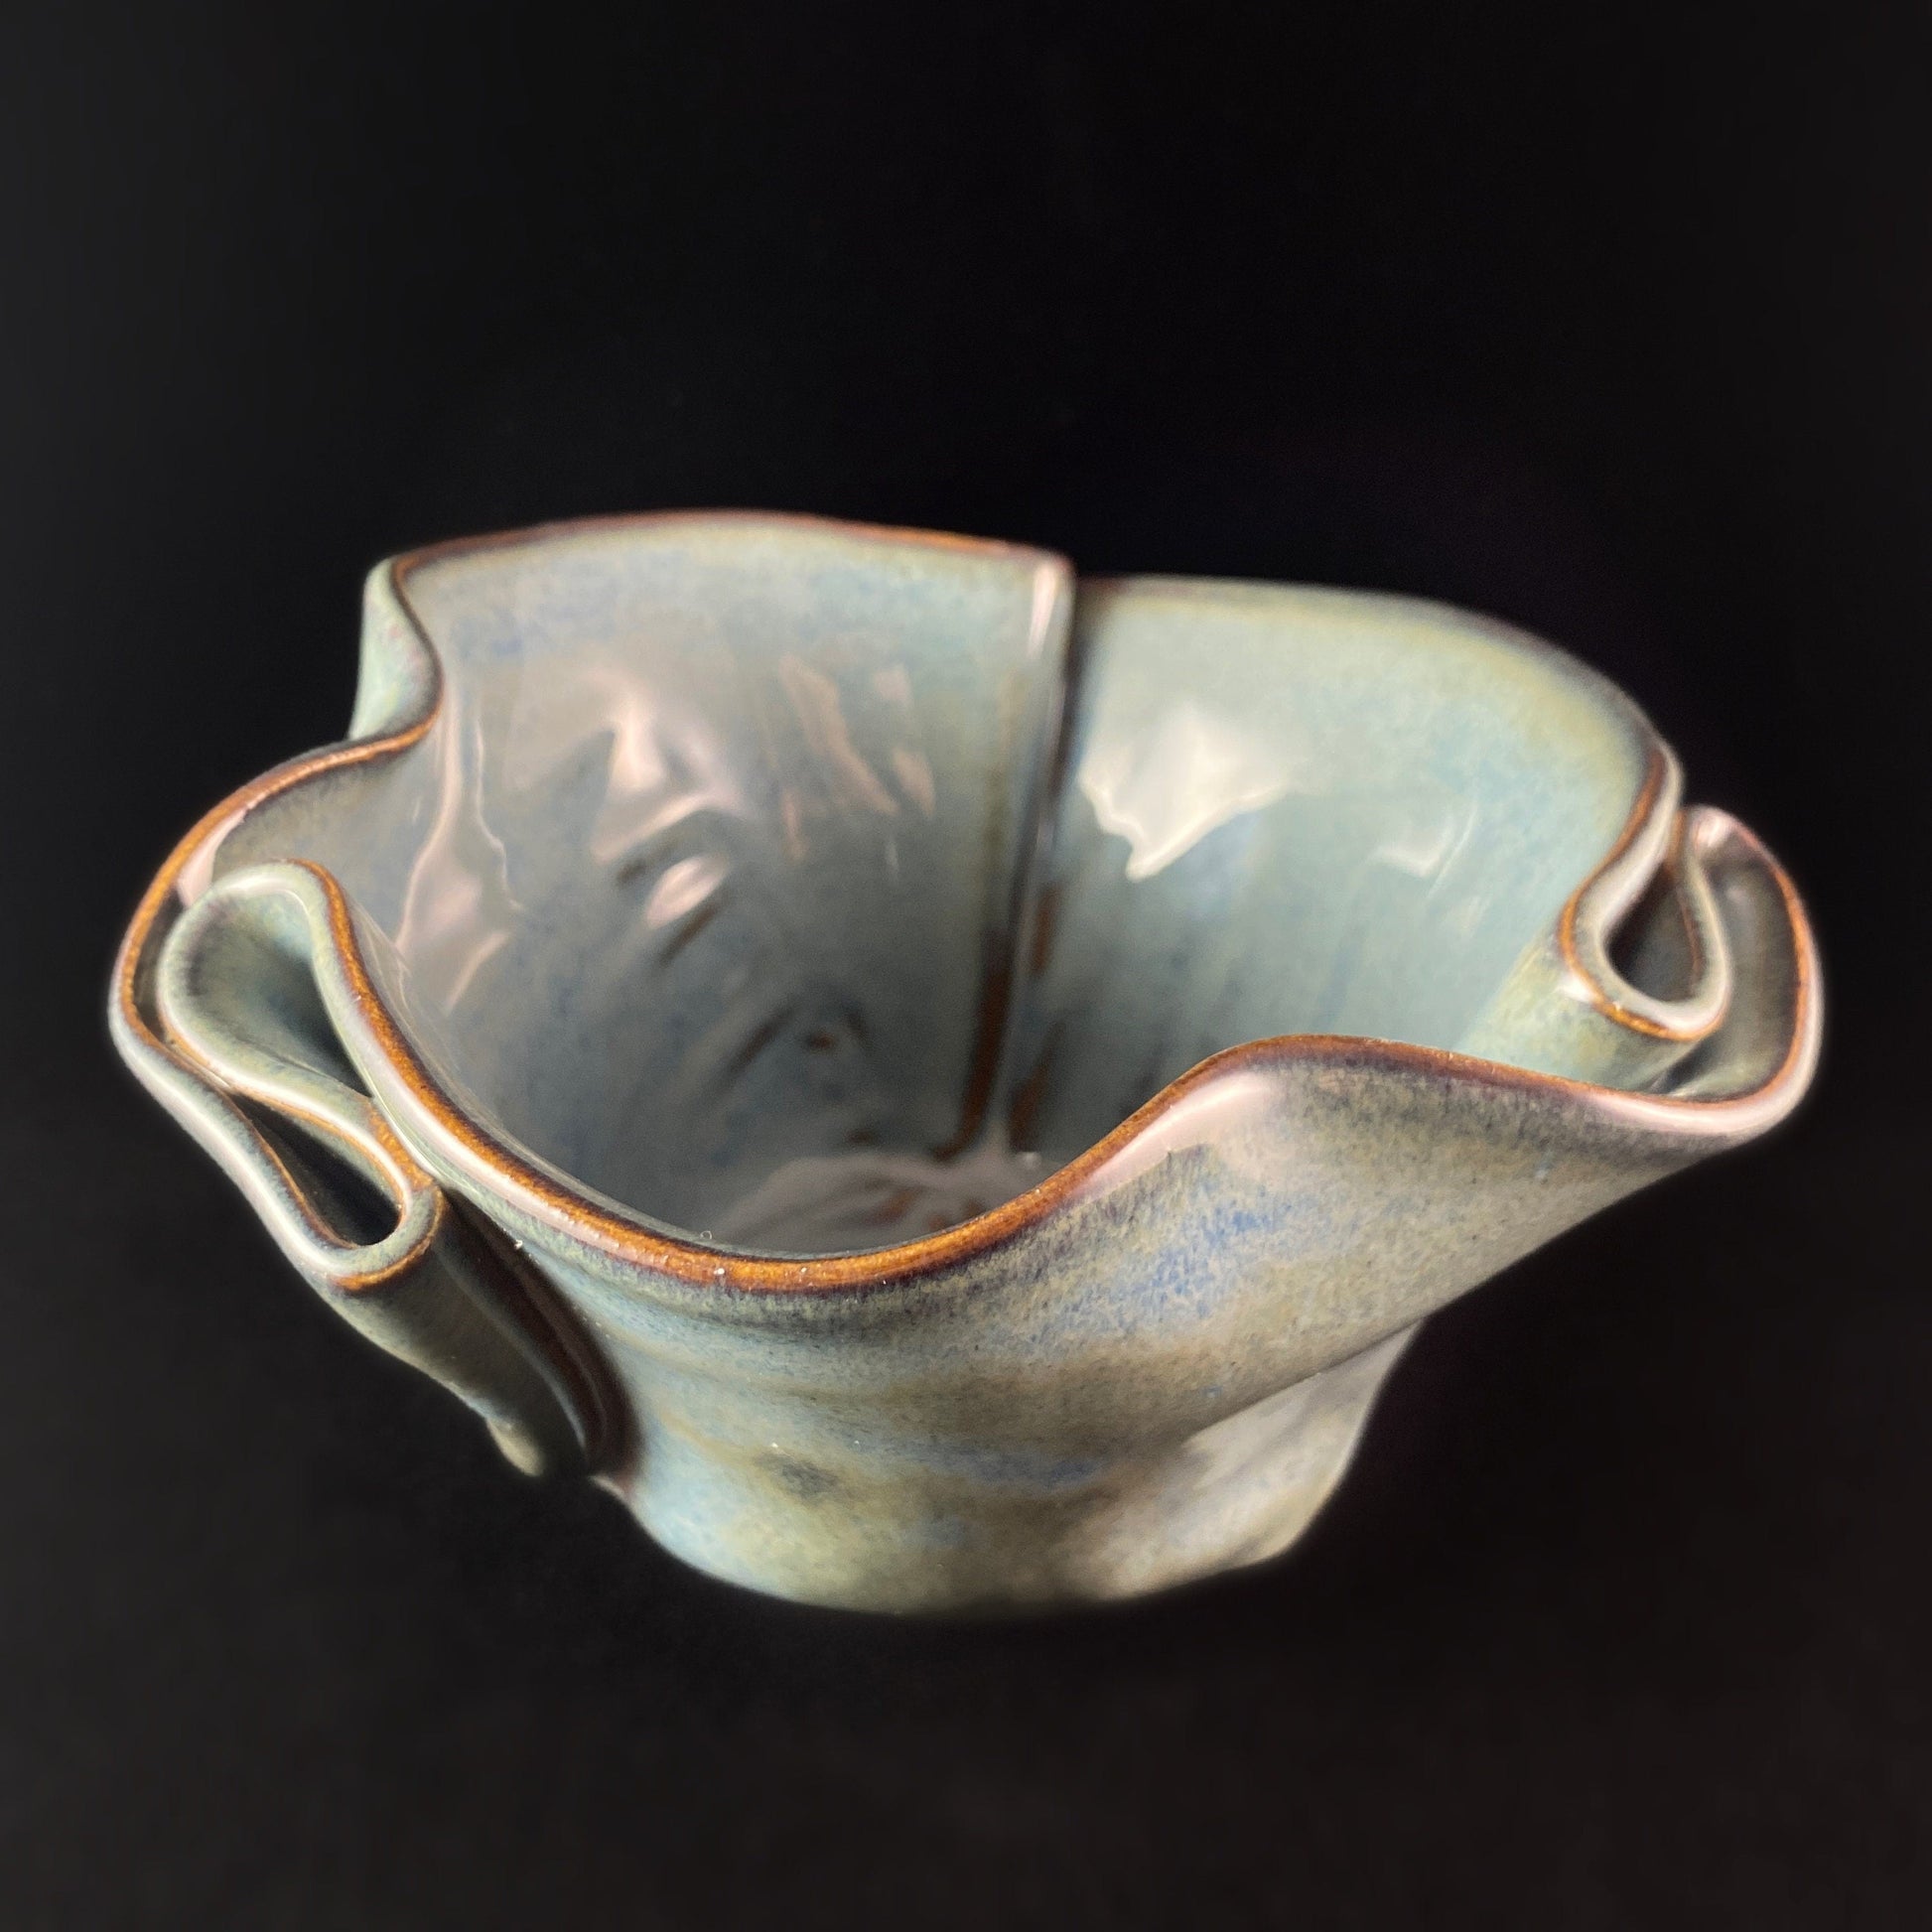 Handmade Guacamole Bowl with Serving Spoon, Functional and Decorative Pottery